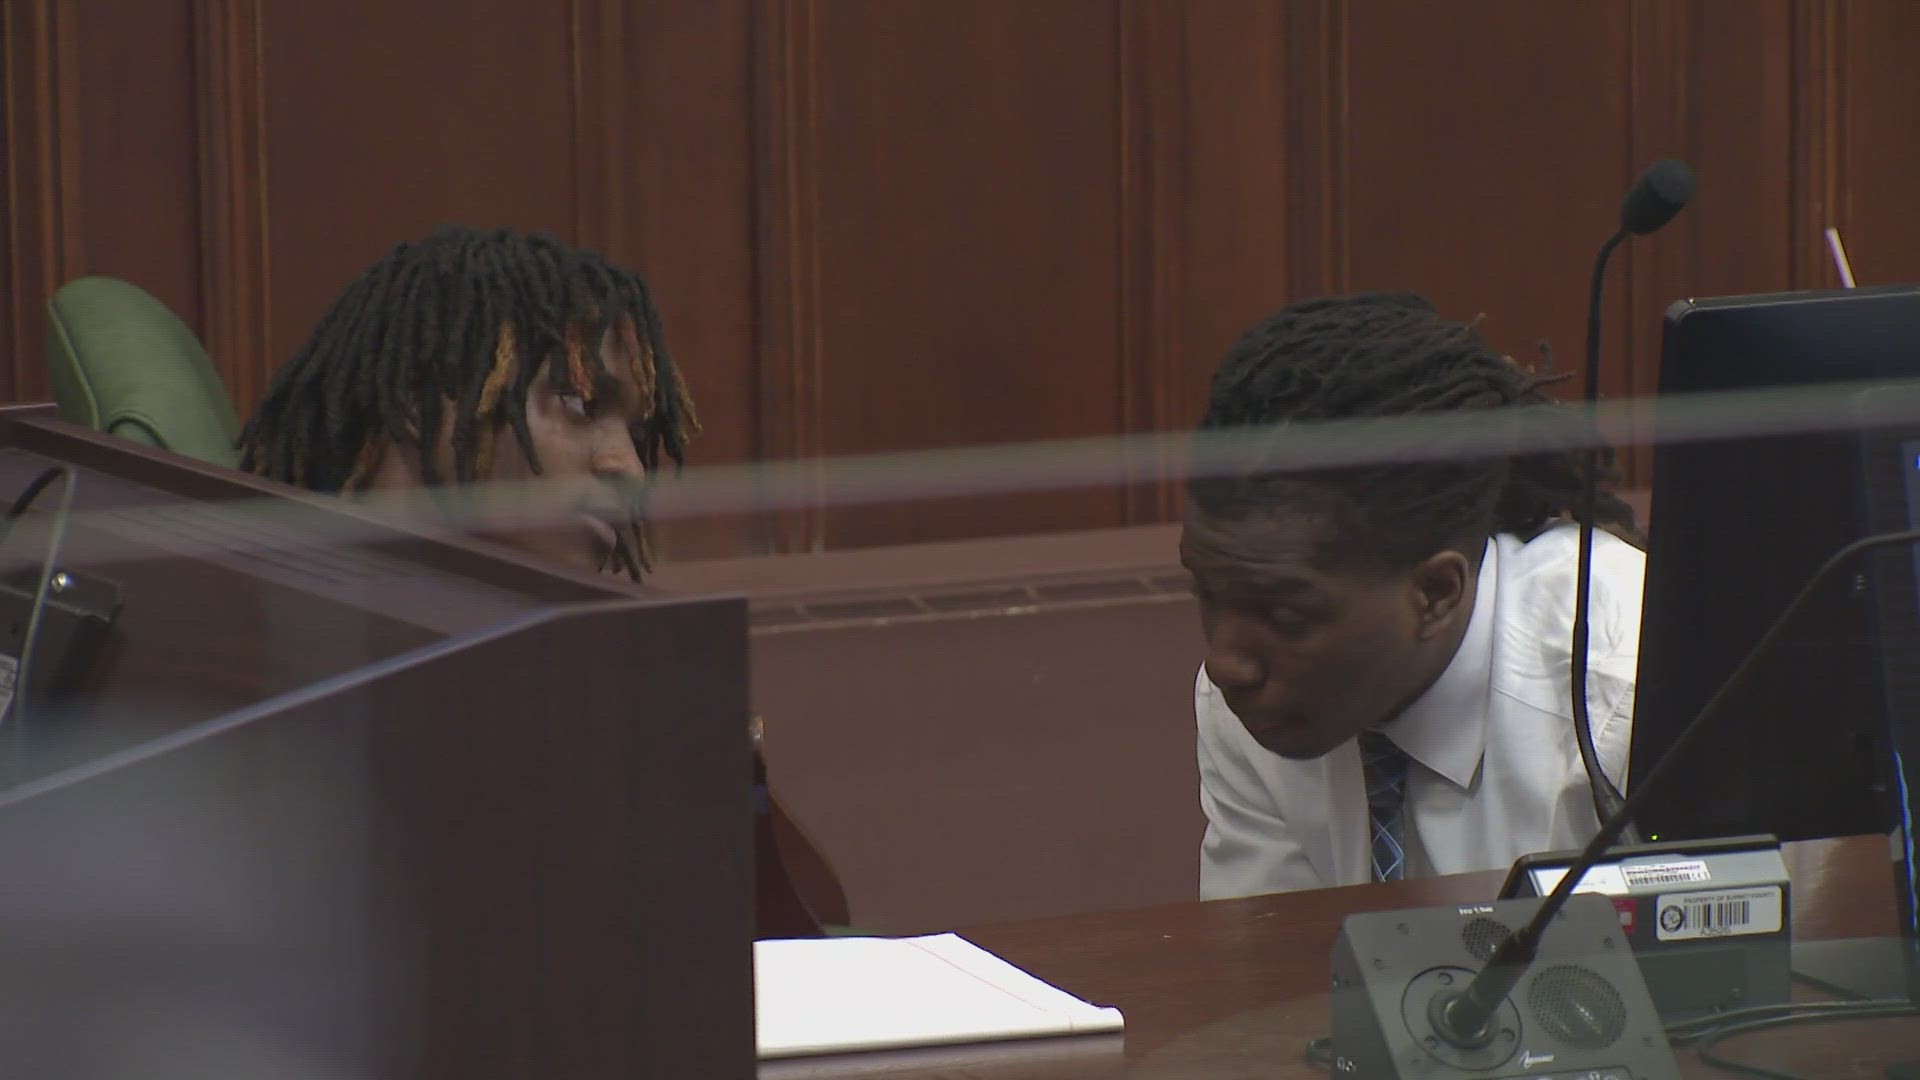 Tyler Stafford and Deshawn Stafford Jr. are accused of causing Liming's death after Liming and a group of friends shot them and another man with a water pellet gun.